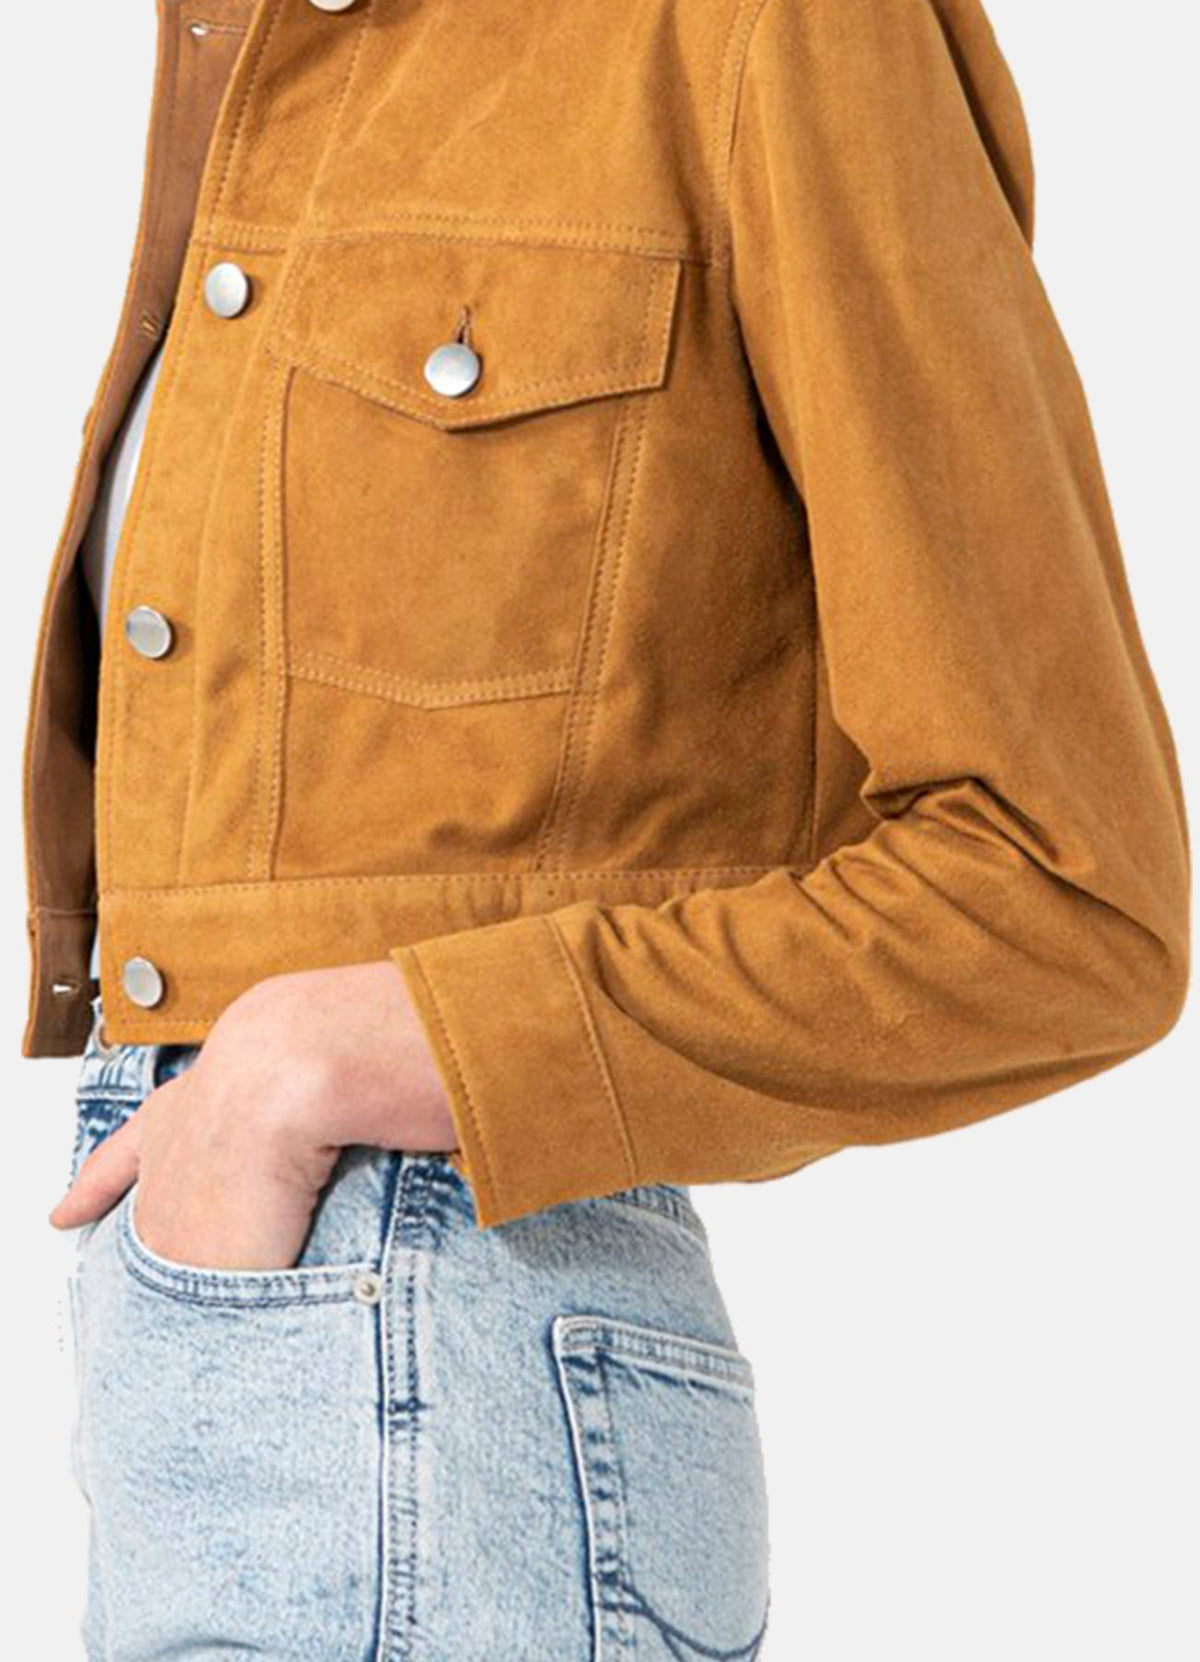 Womens TAN Denim Style Suede Leather Jacket